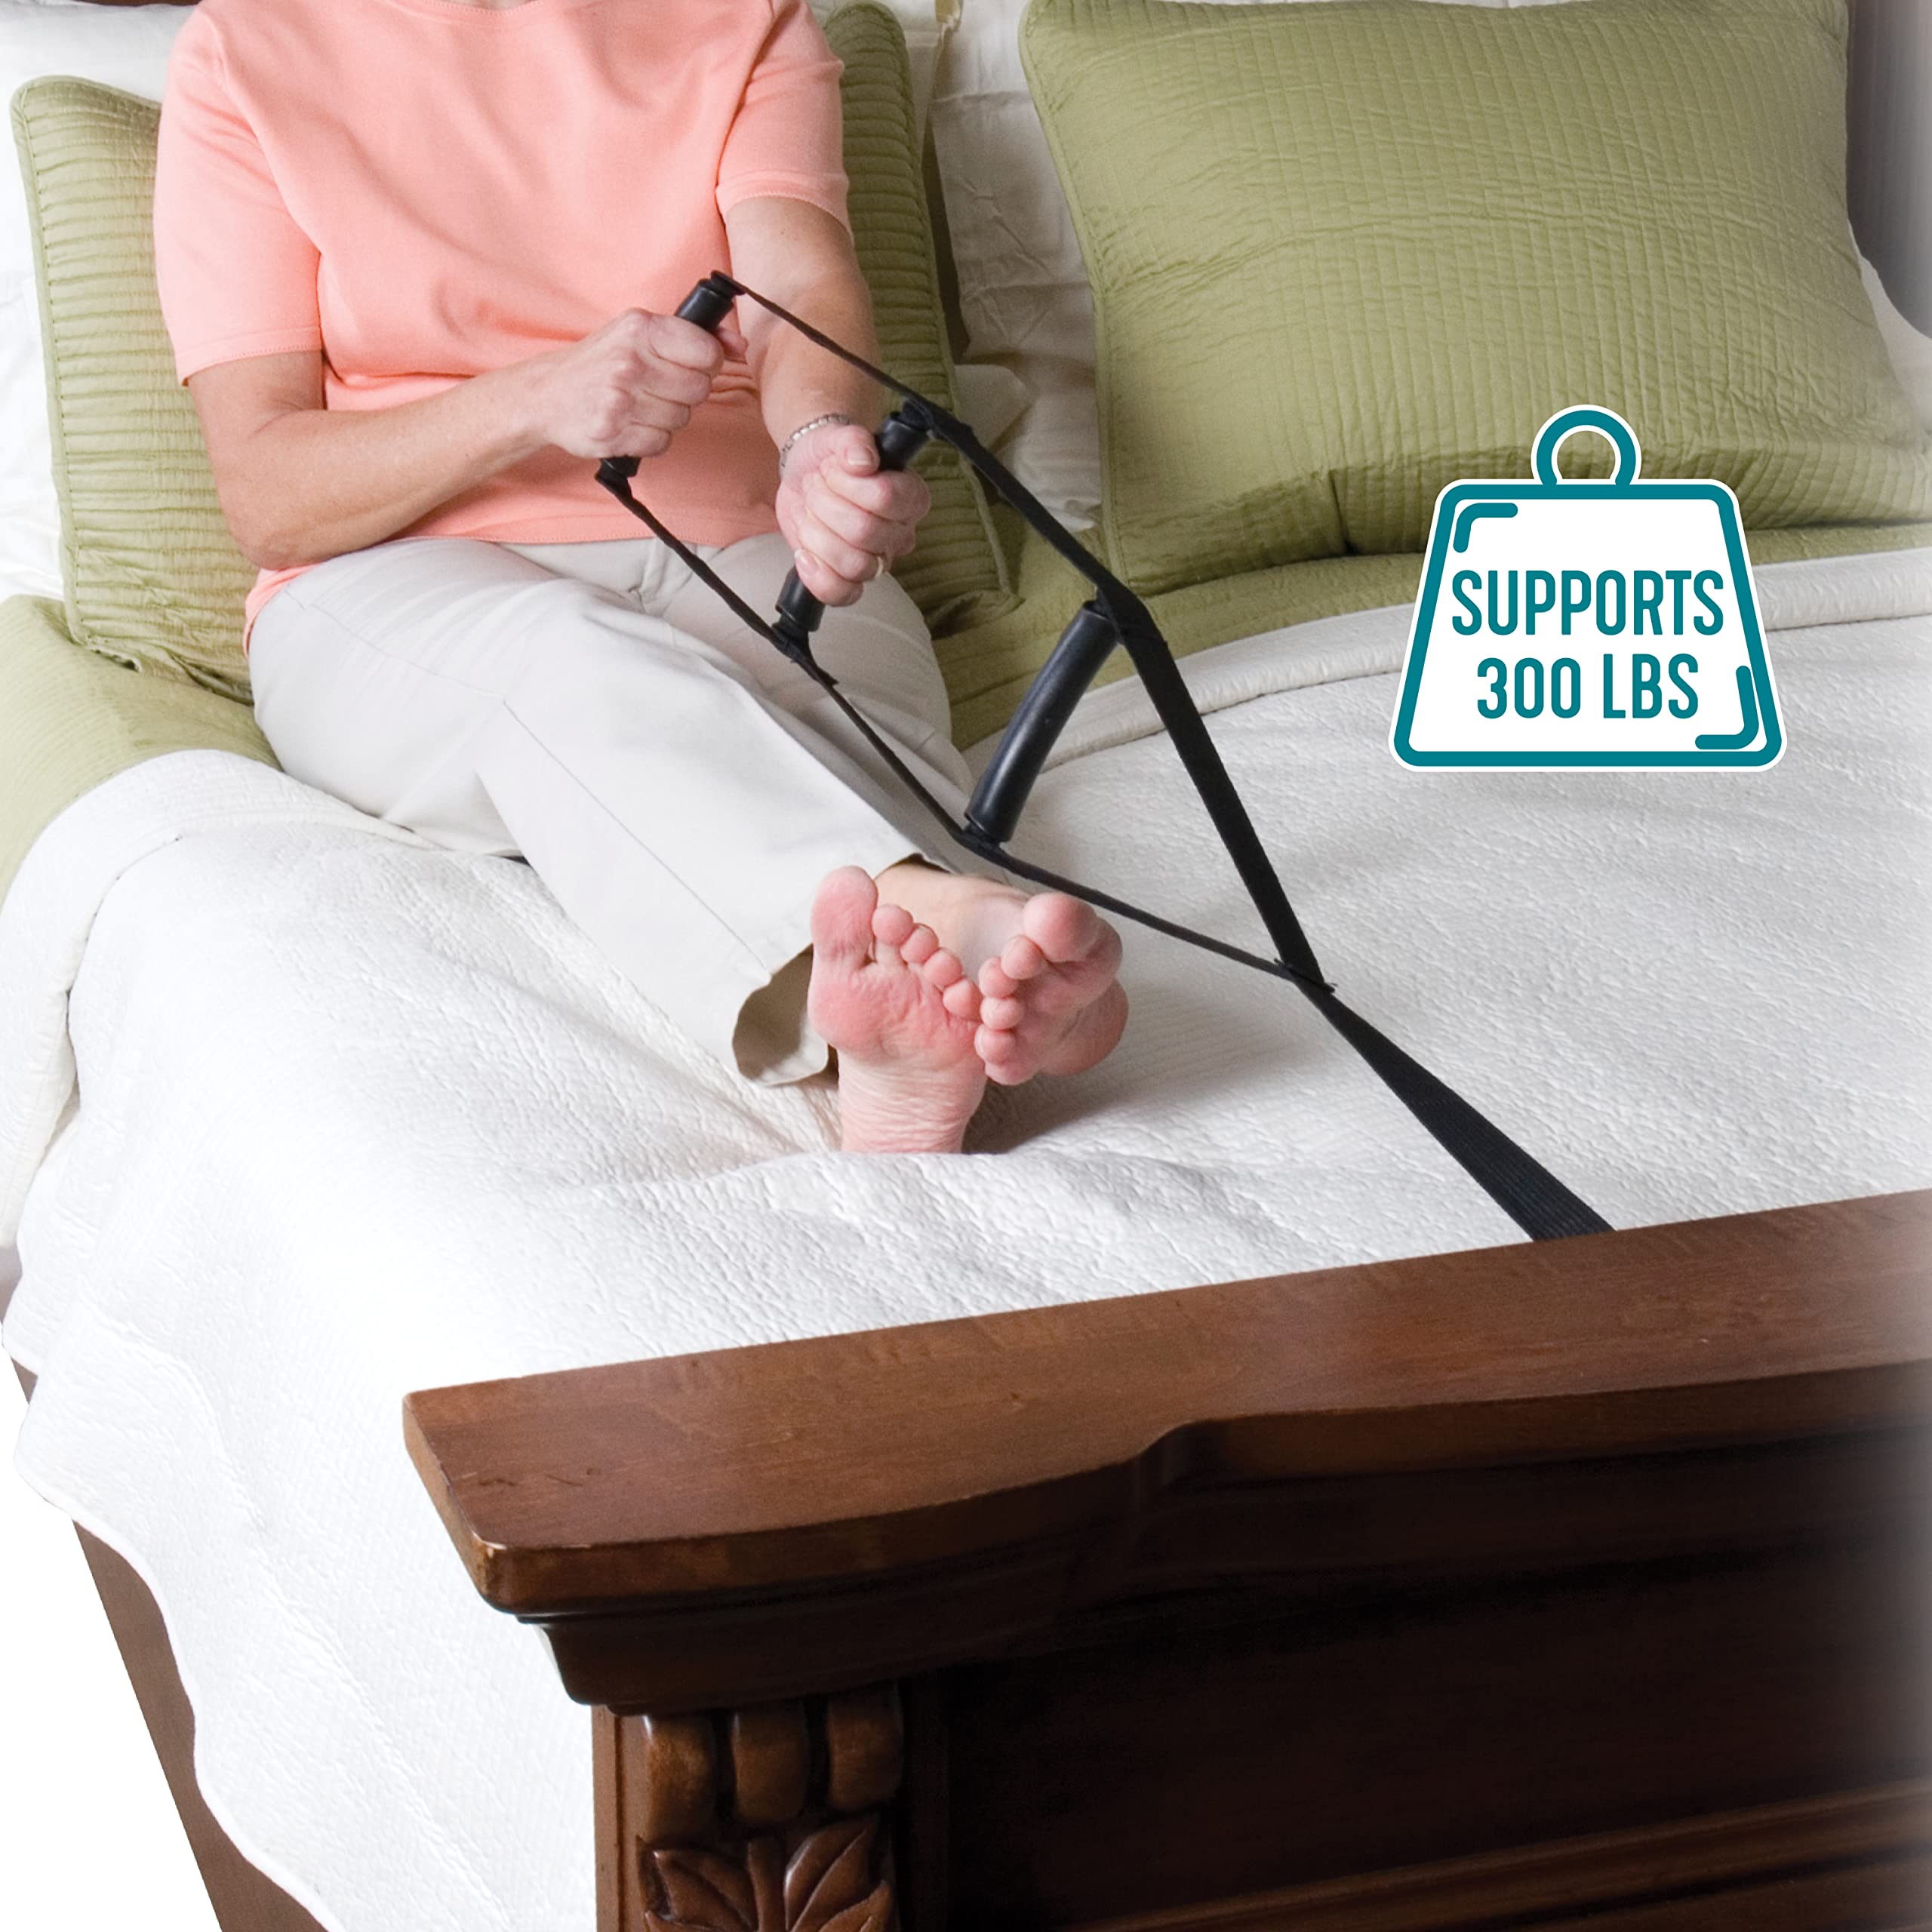 Stander BedCaddie, Pull Up Assist Bed Ladder with Non-Slip Handles for Adults, Seniors, and Elderly, Adjustable Length Bed Lift, Sit Up Helper Bed Assistance, Mobility Aid for Handicapped and Injured